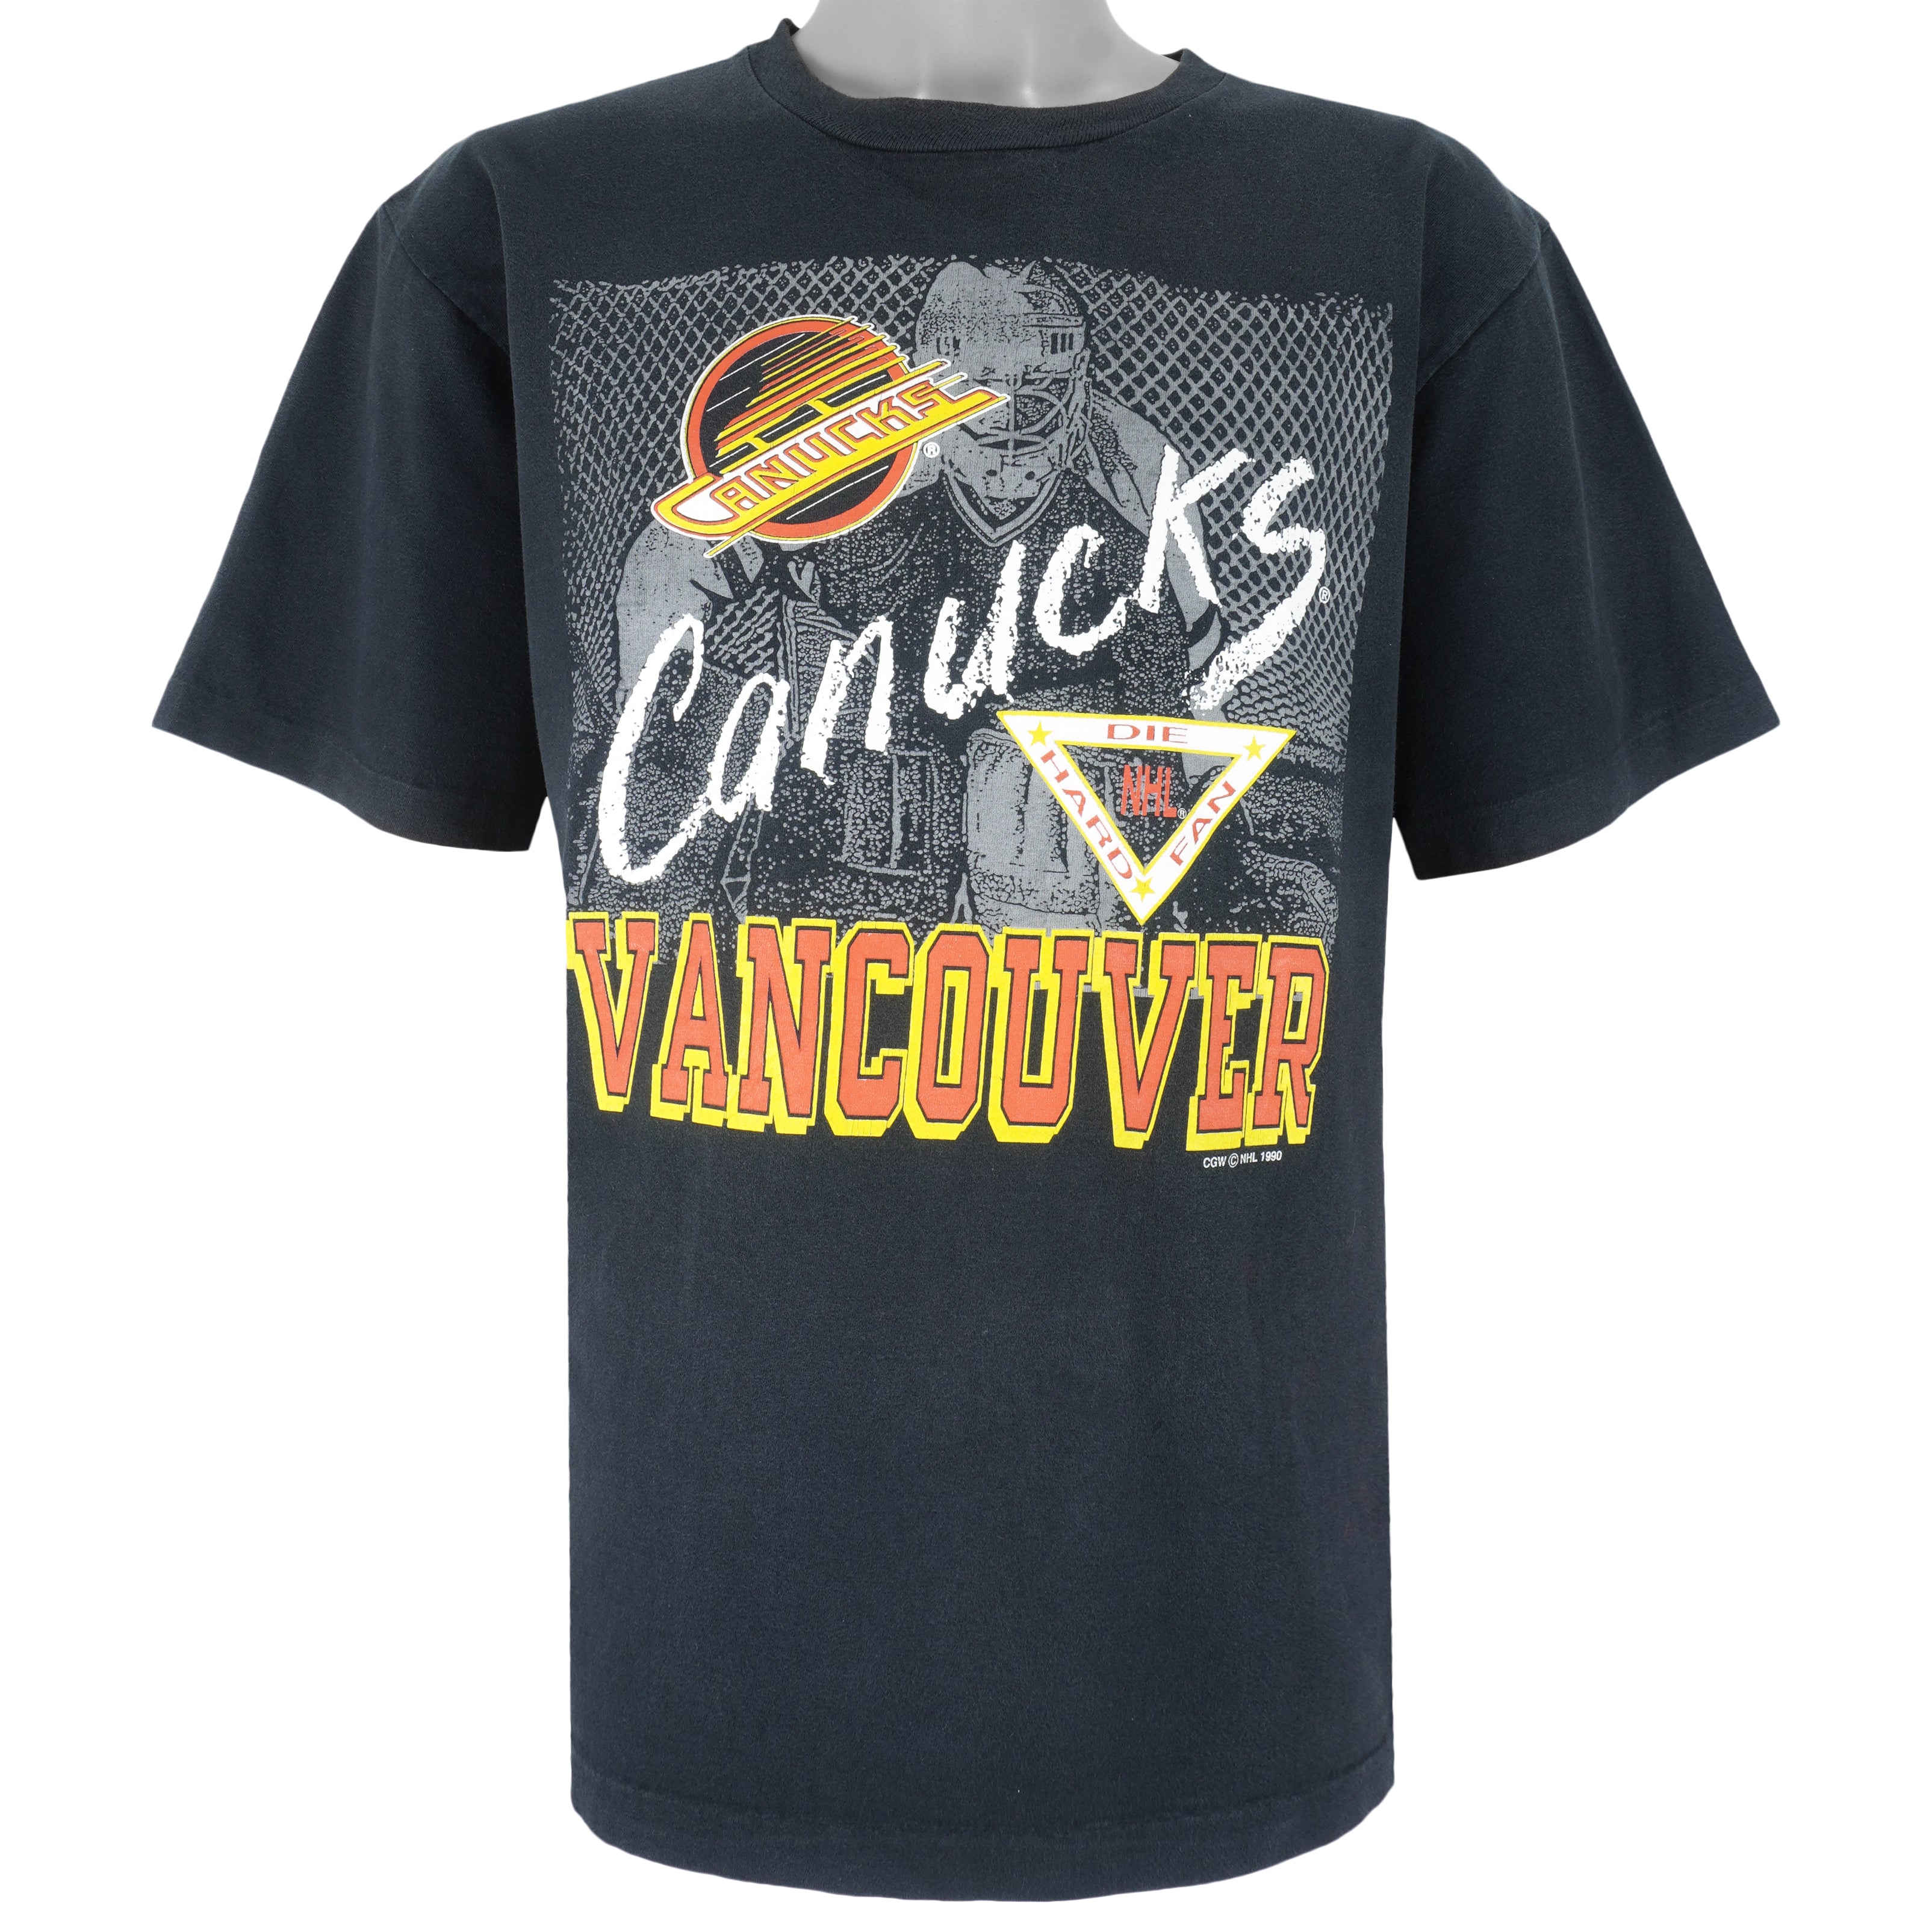 Vintage Vancouver Canucks Jersey - Home and 50 similar items